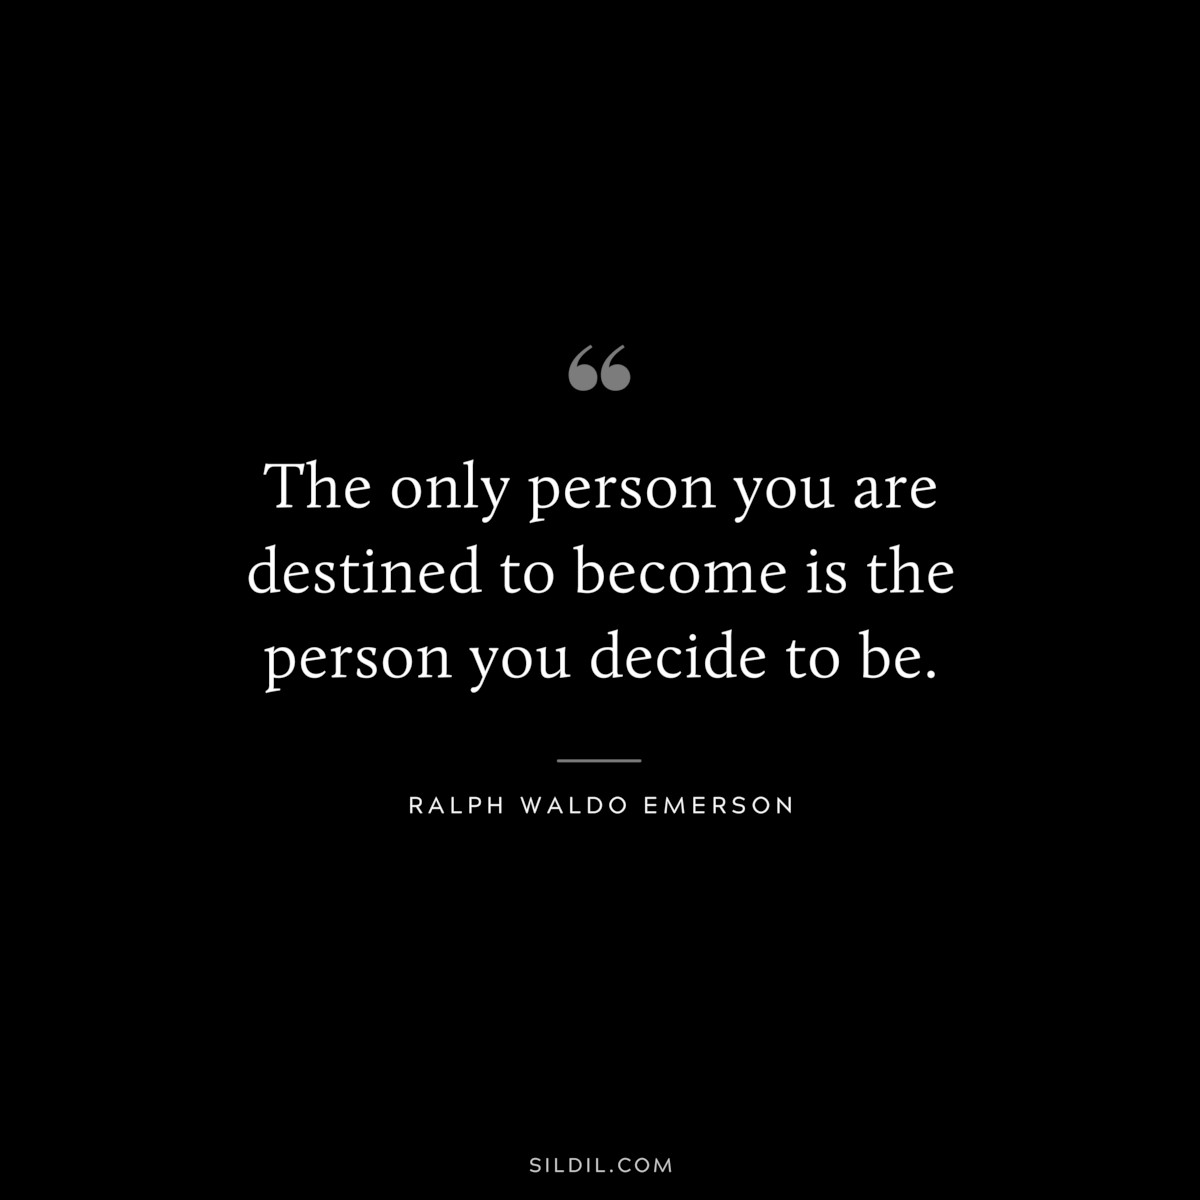 The only person you are destined to become is the person you decide to be. — Ralph Waldo Emerson